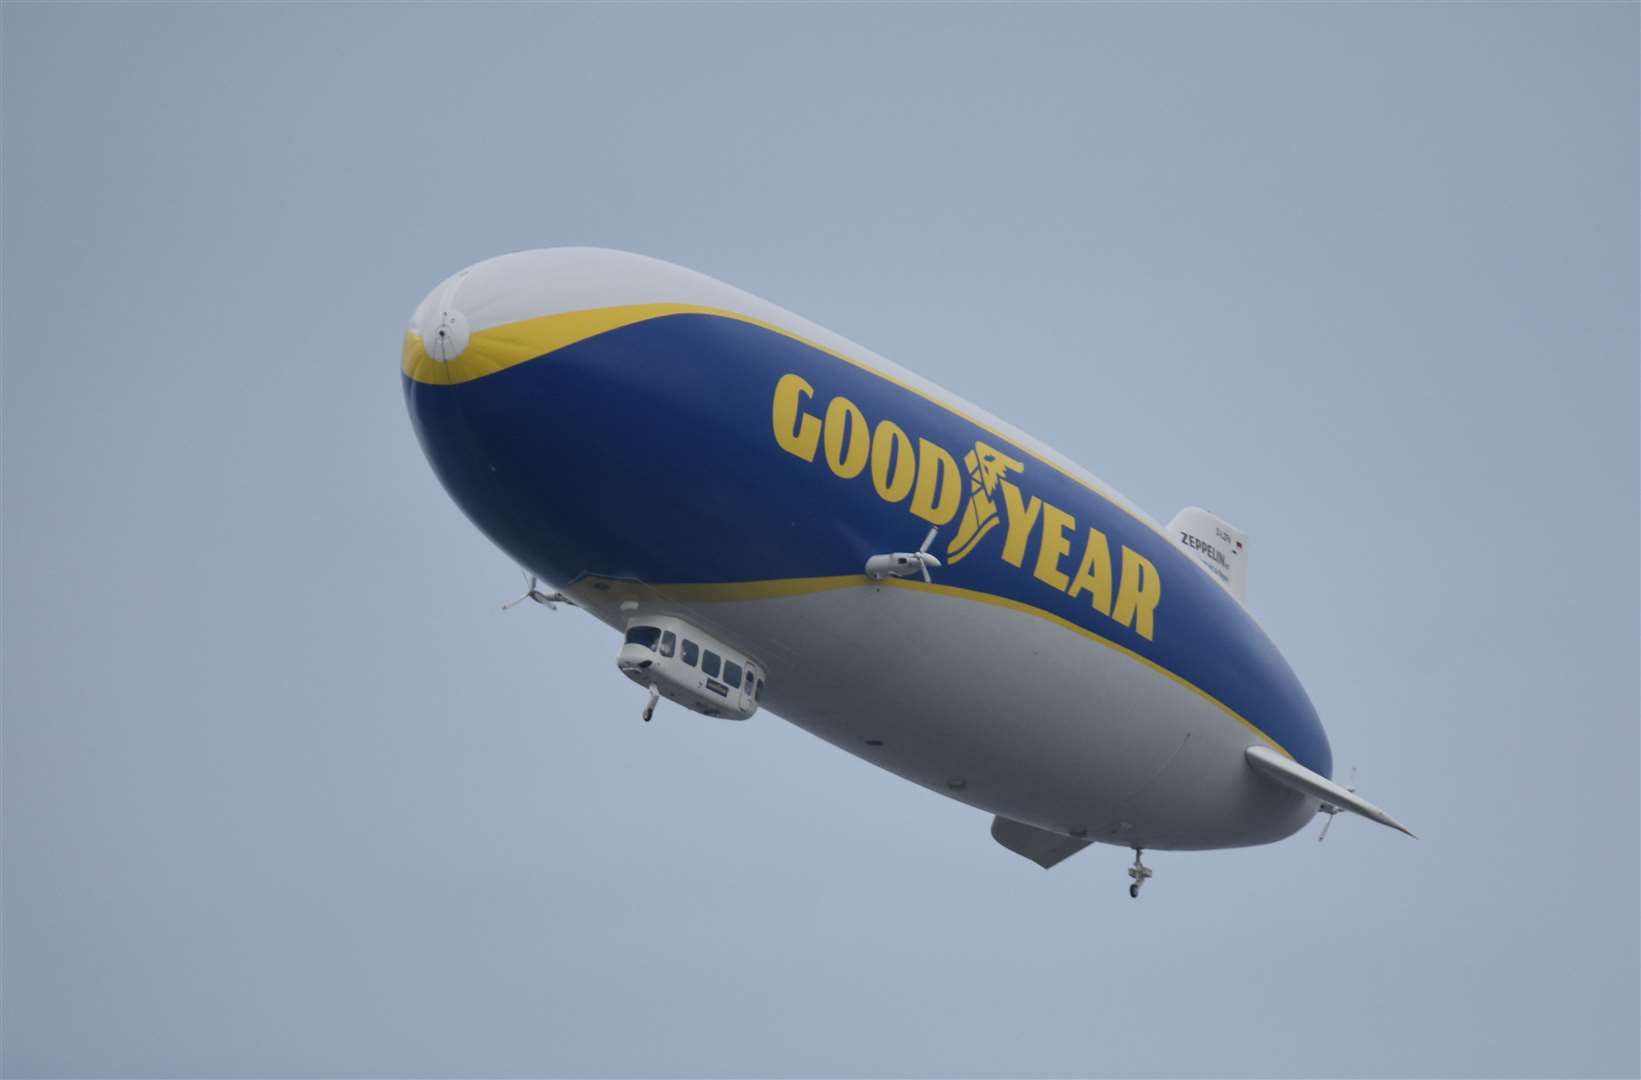 The Goodyear blimp was spotted flying over Gravesend this afternoon. Photo: Jason Arthur